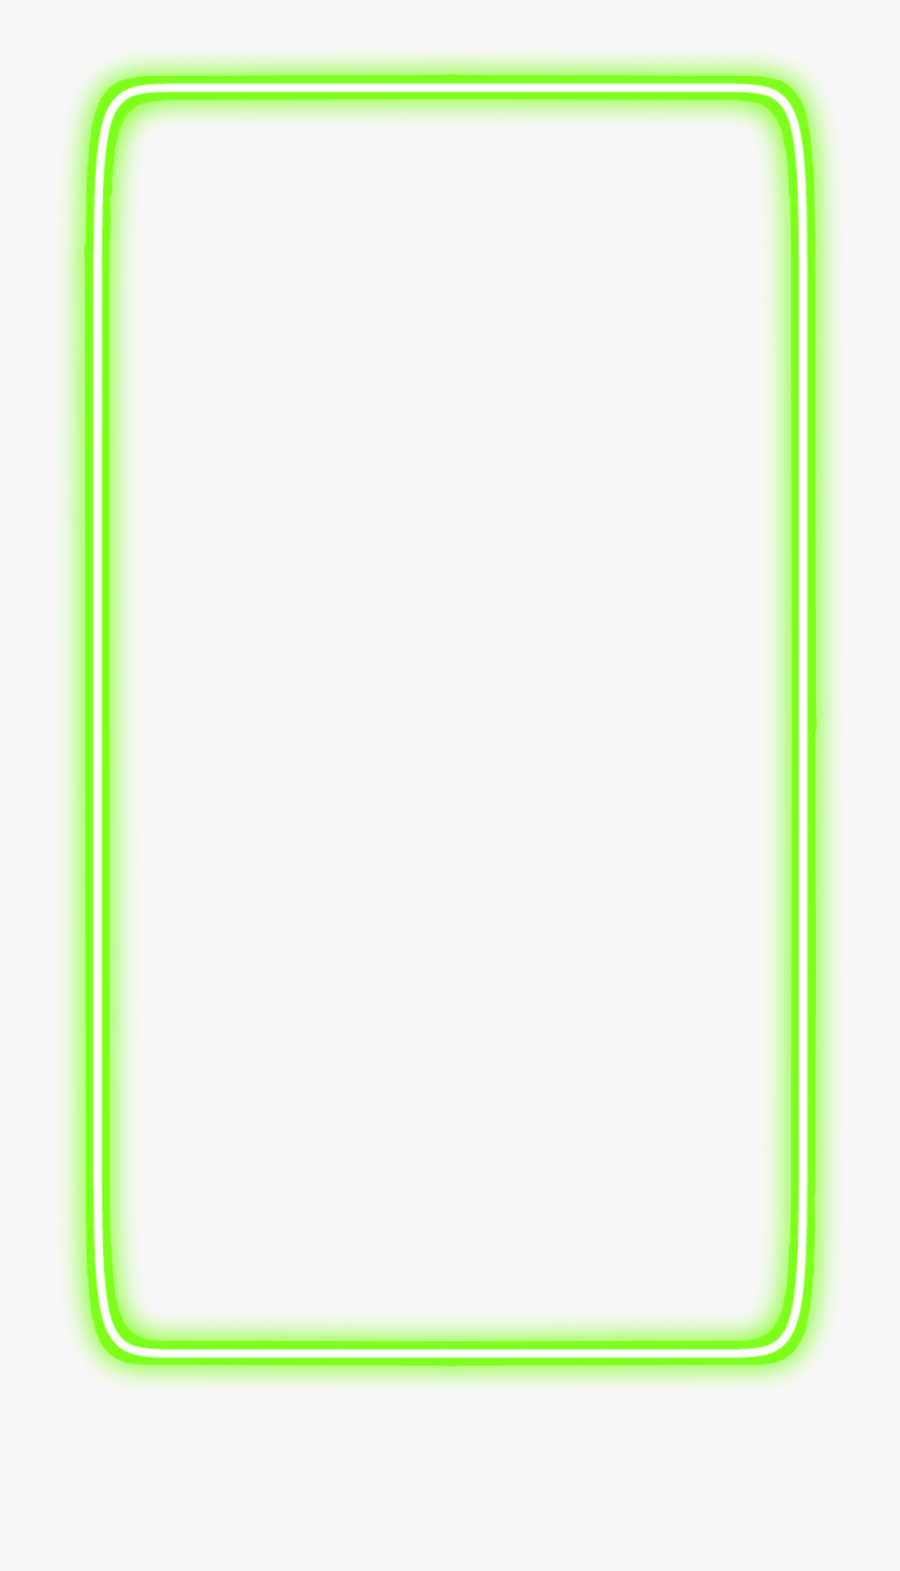 #neon #rectangle #freetoedit #green #frame #border - Display Device, Transparent Clipart